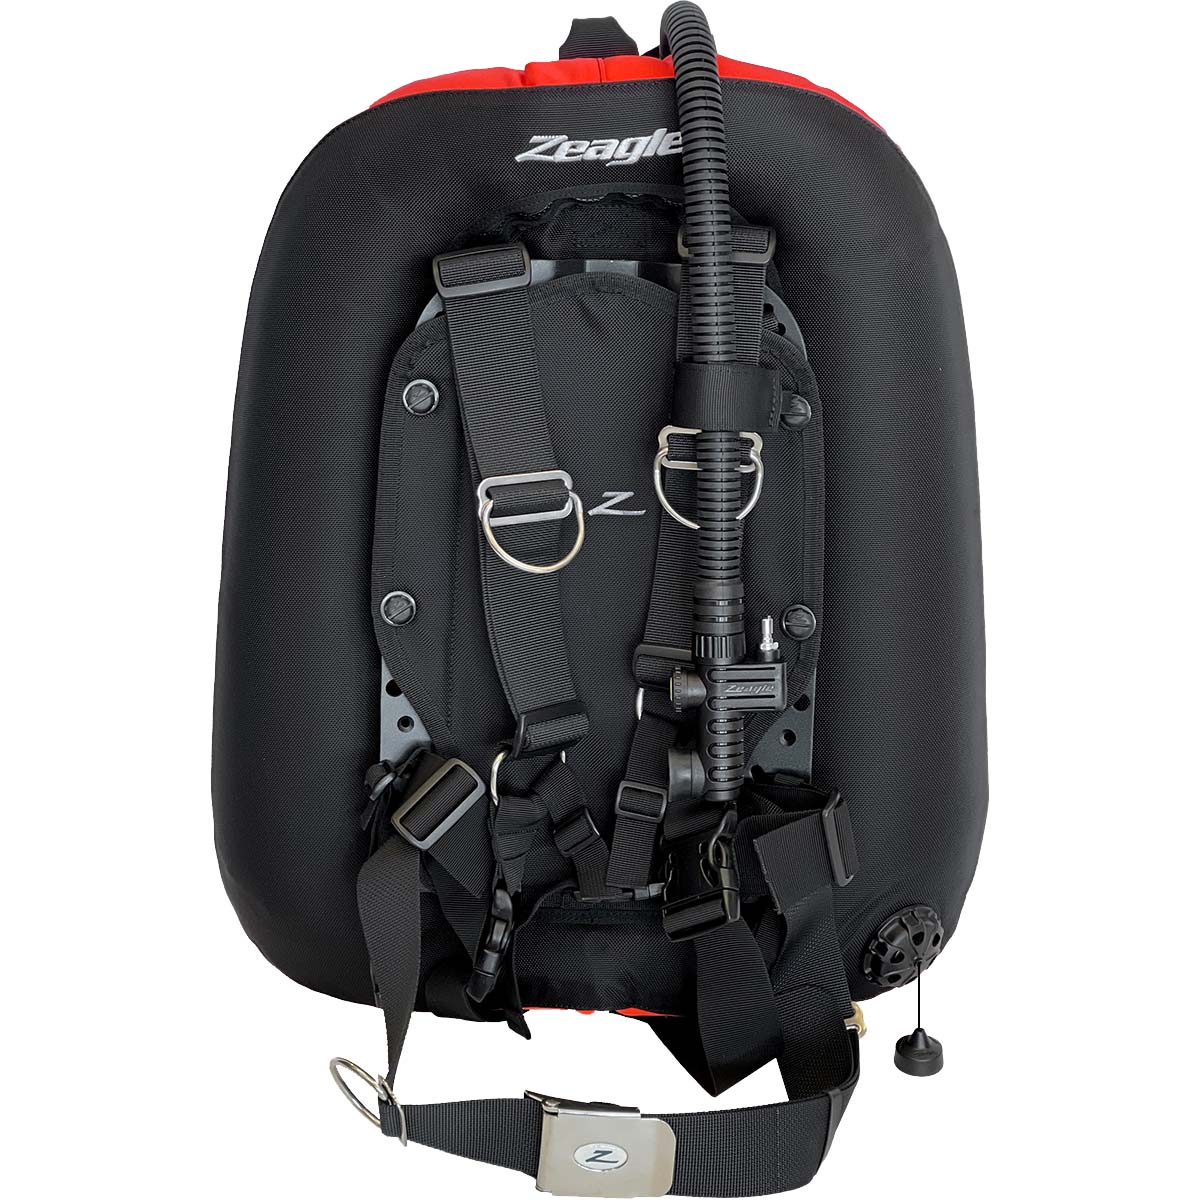 Zeagle 40lb Backplate BCD Combo